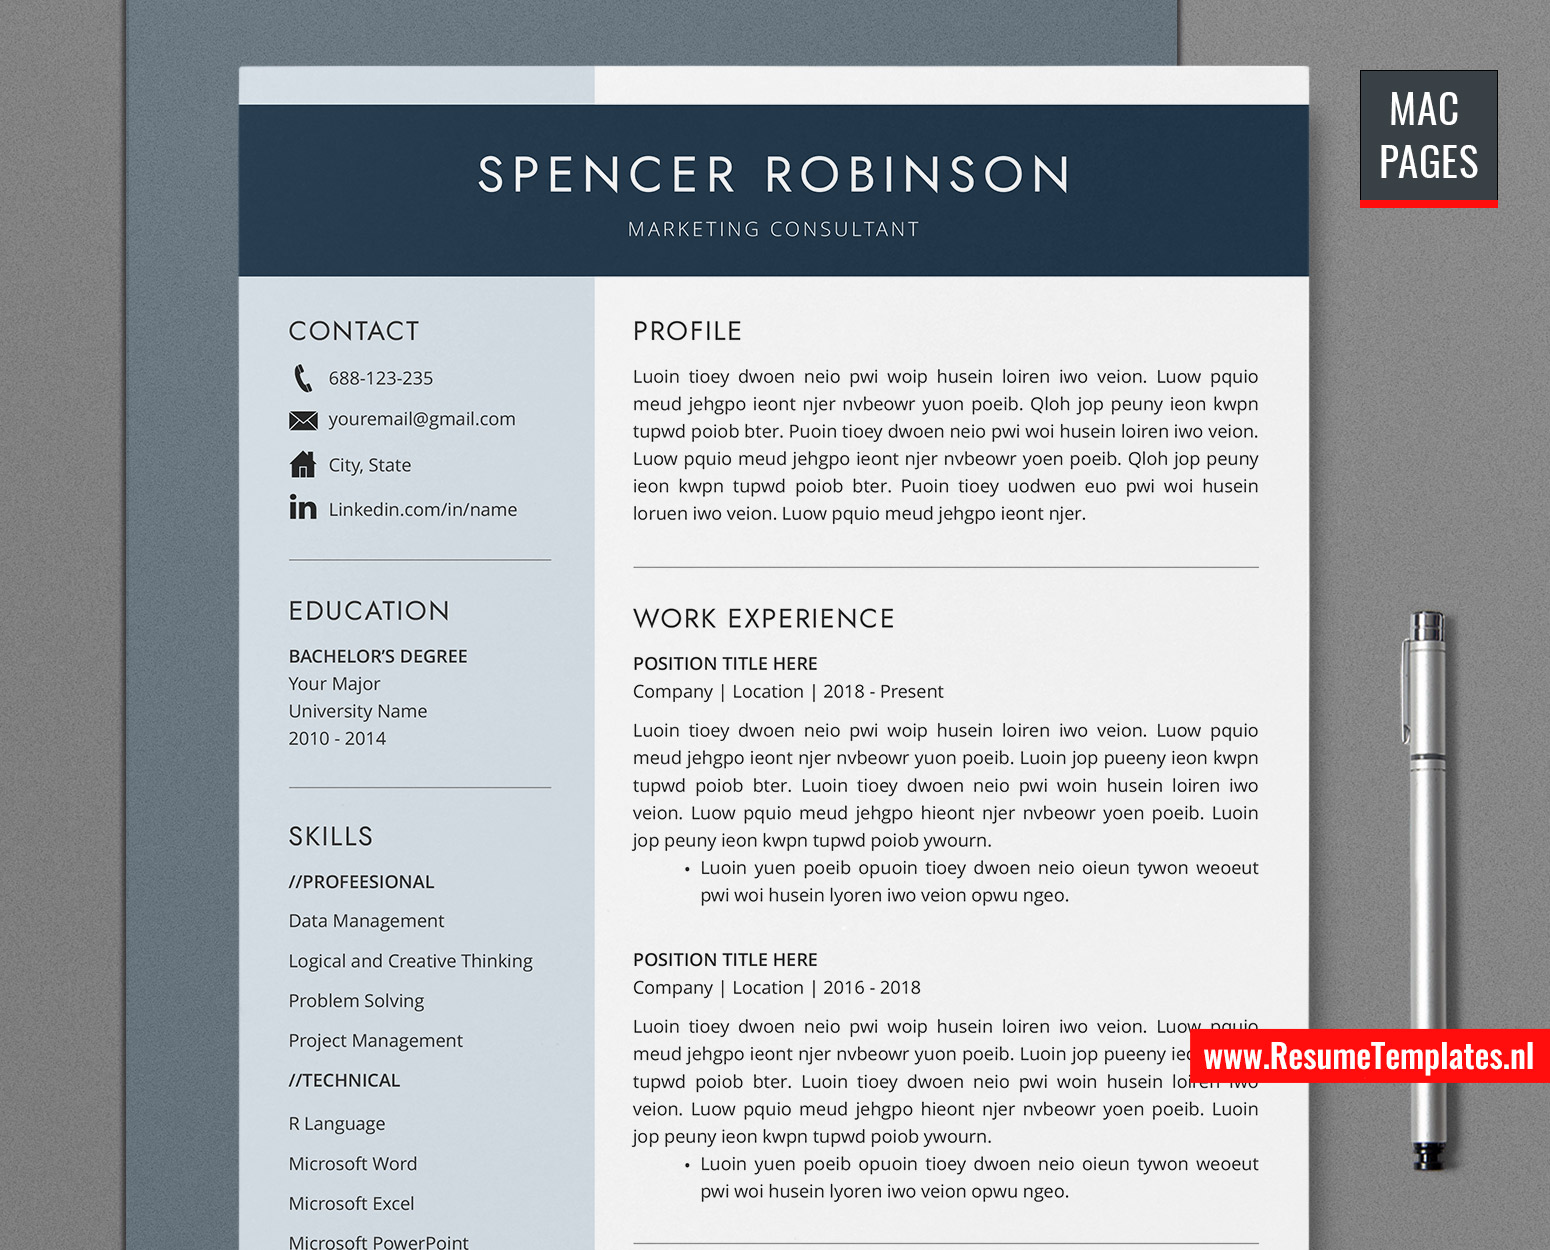 for-mac-pages-simple-resume-template-cv-template-for-mac-pages-cover-letter-curriculum